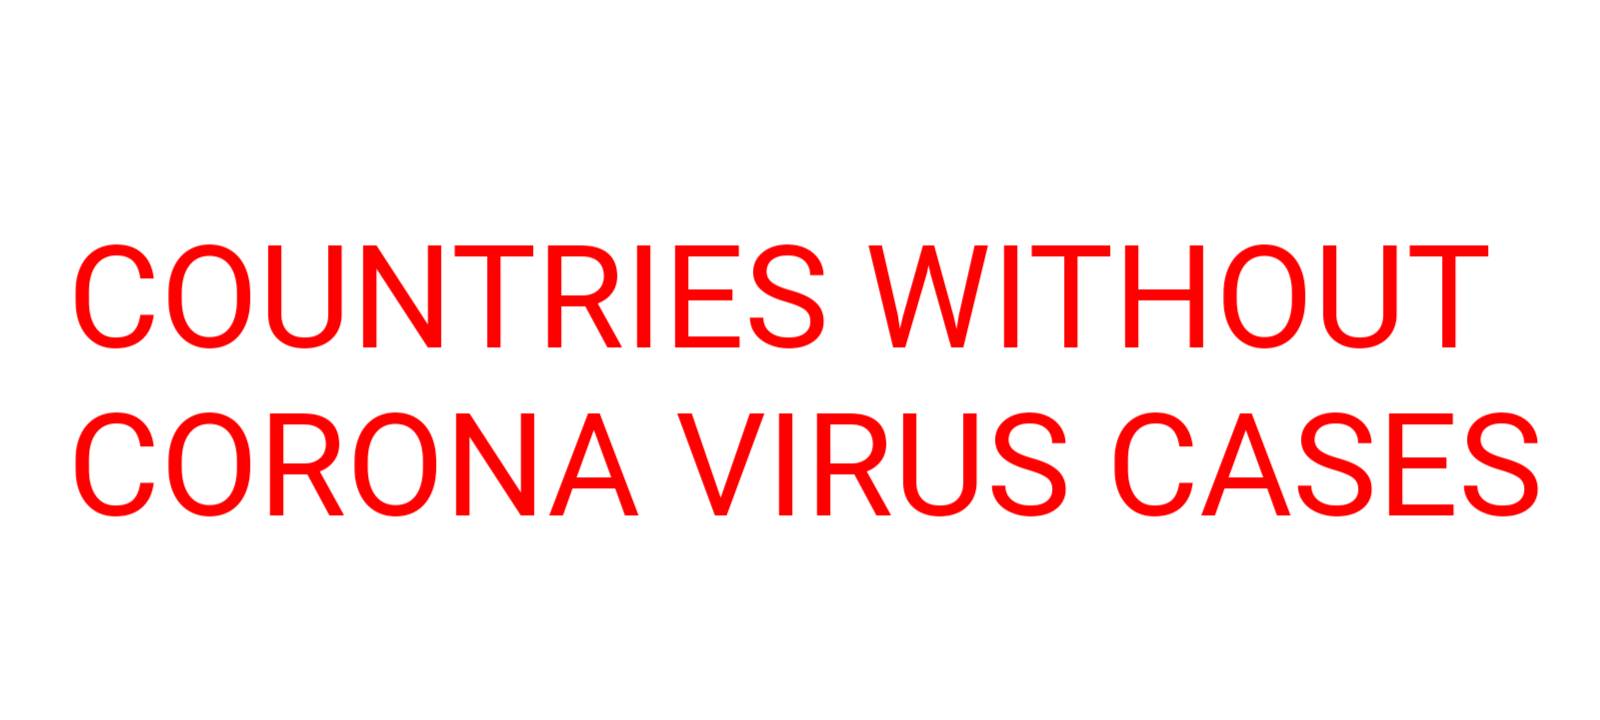 Countries without corona virus cases